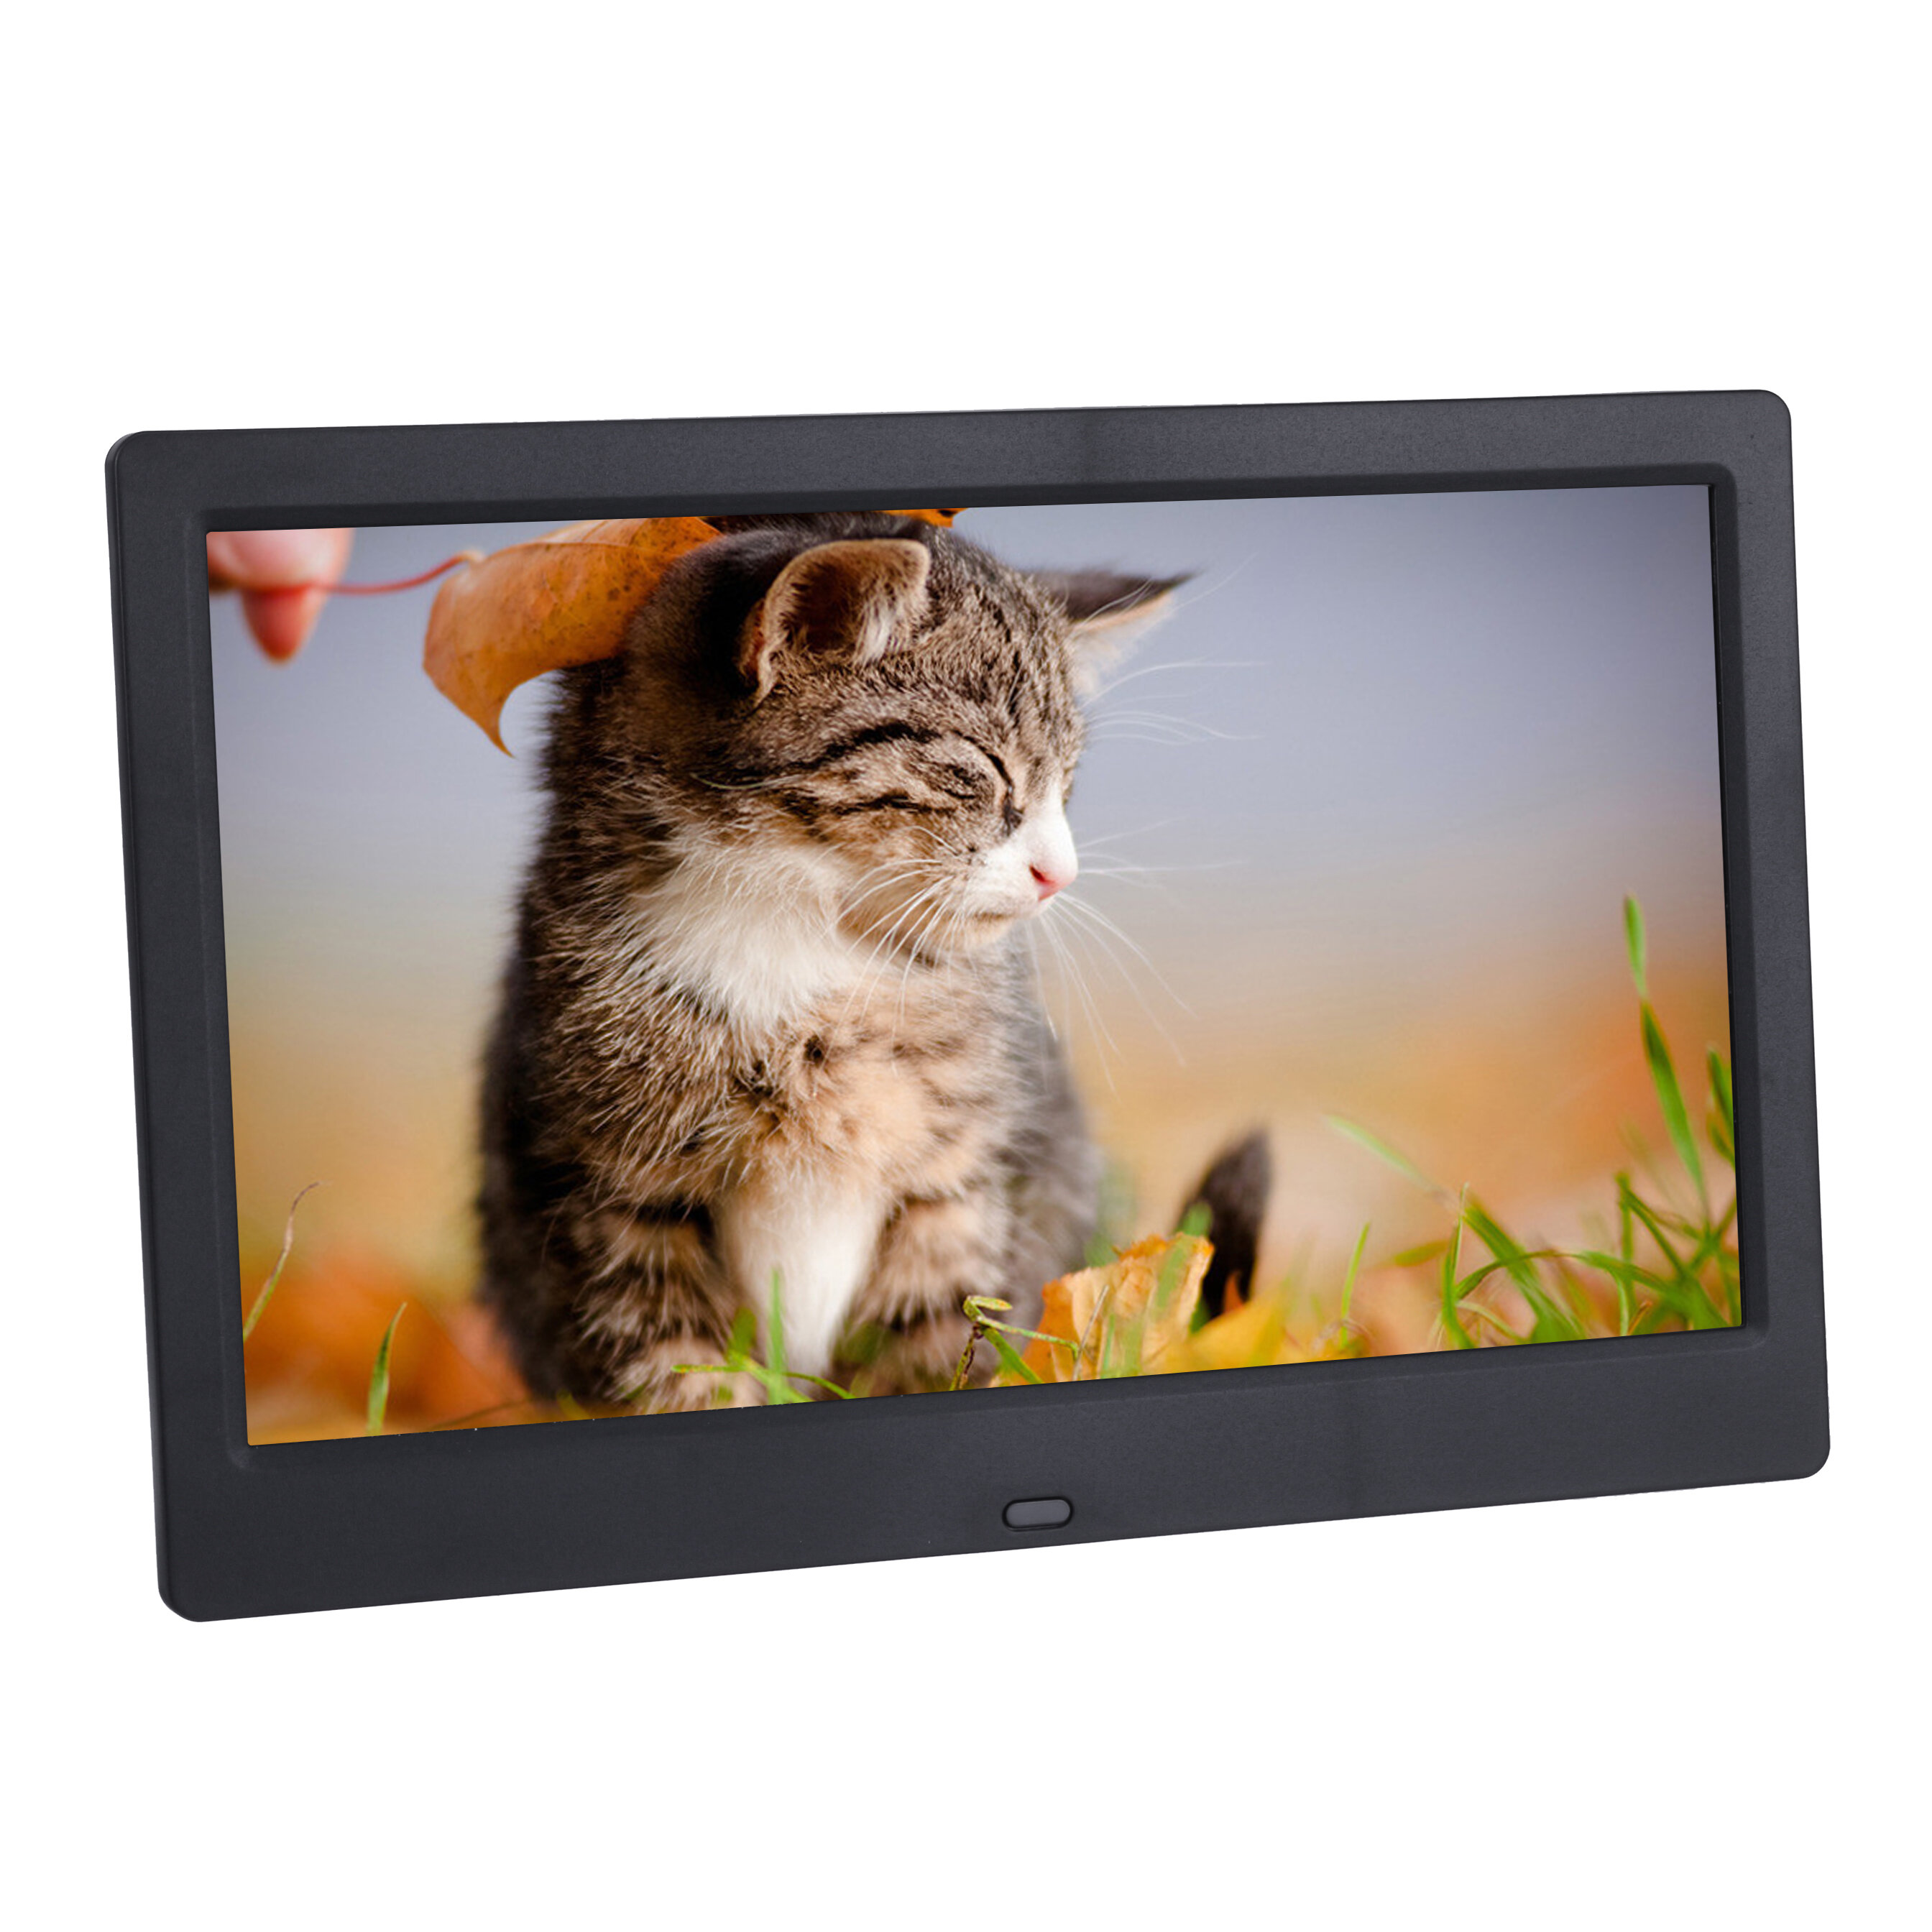 Image of 10 Inch 1024x600 HD IPS LCD Digital Photo Frame Audio Video Player Support SD USB MMC MS Card with Remote Control